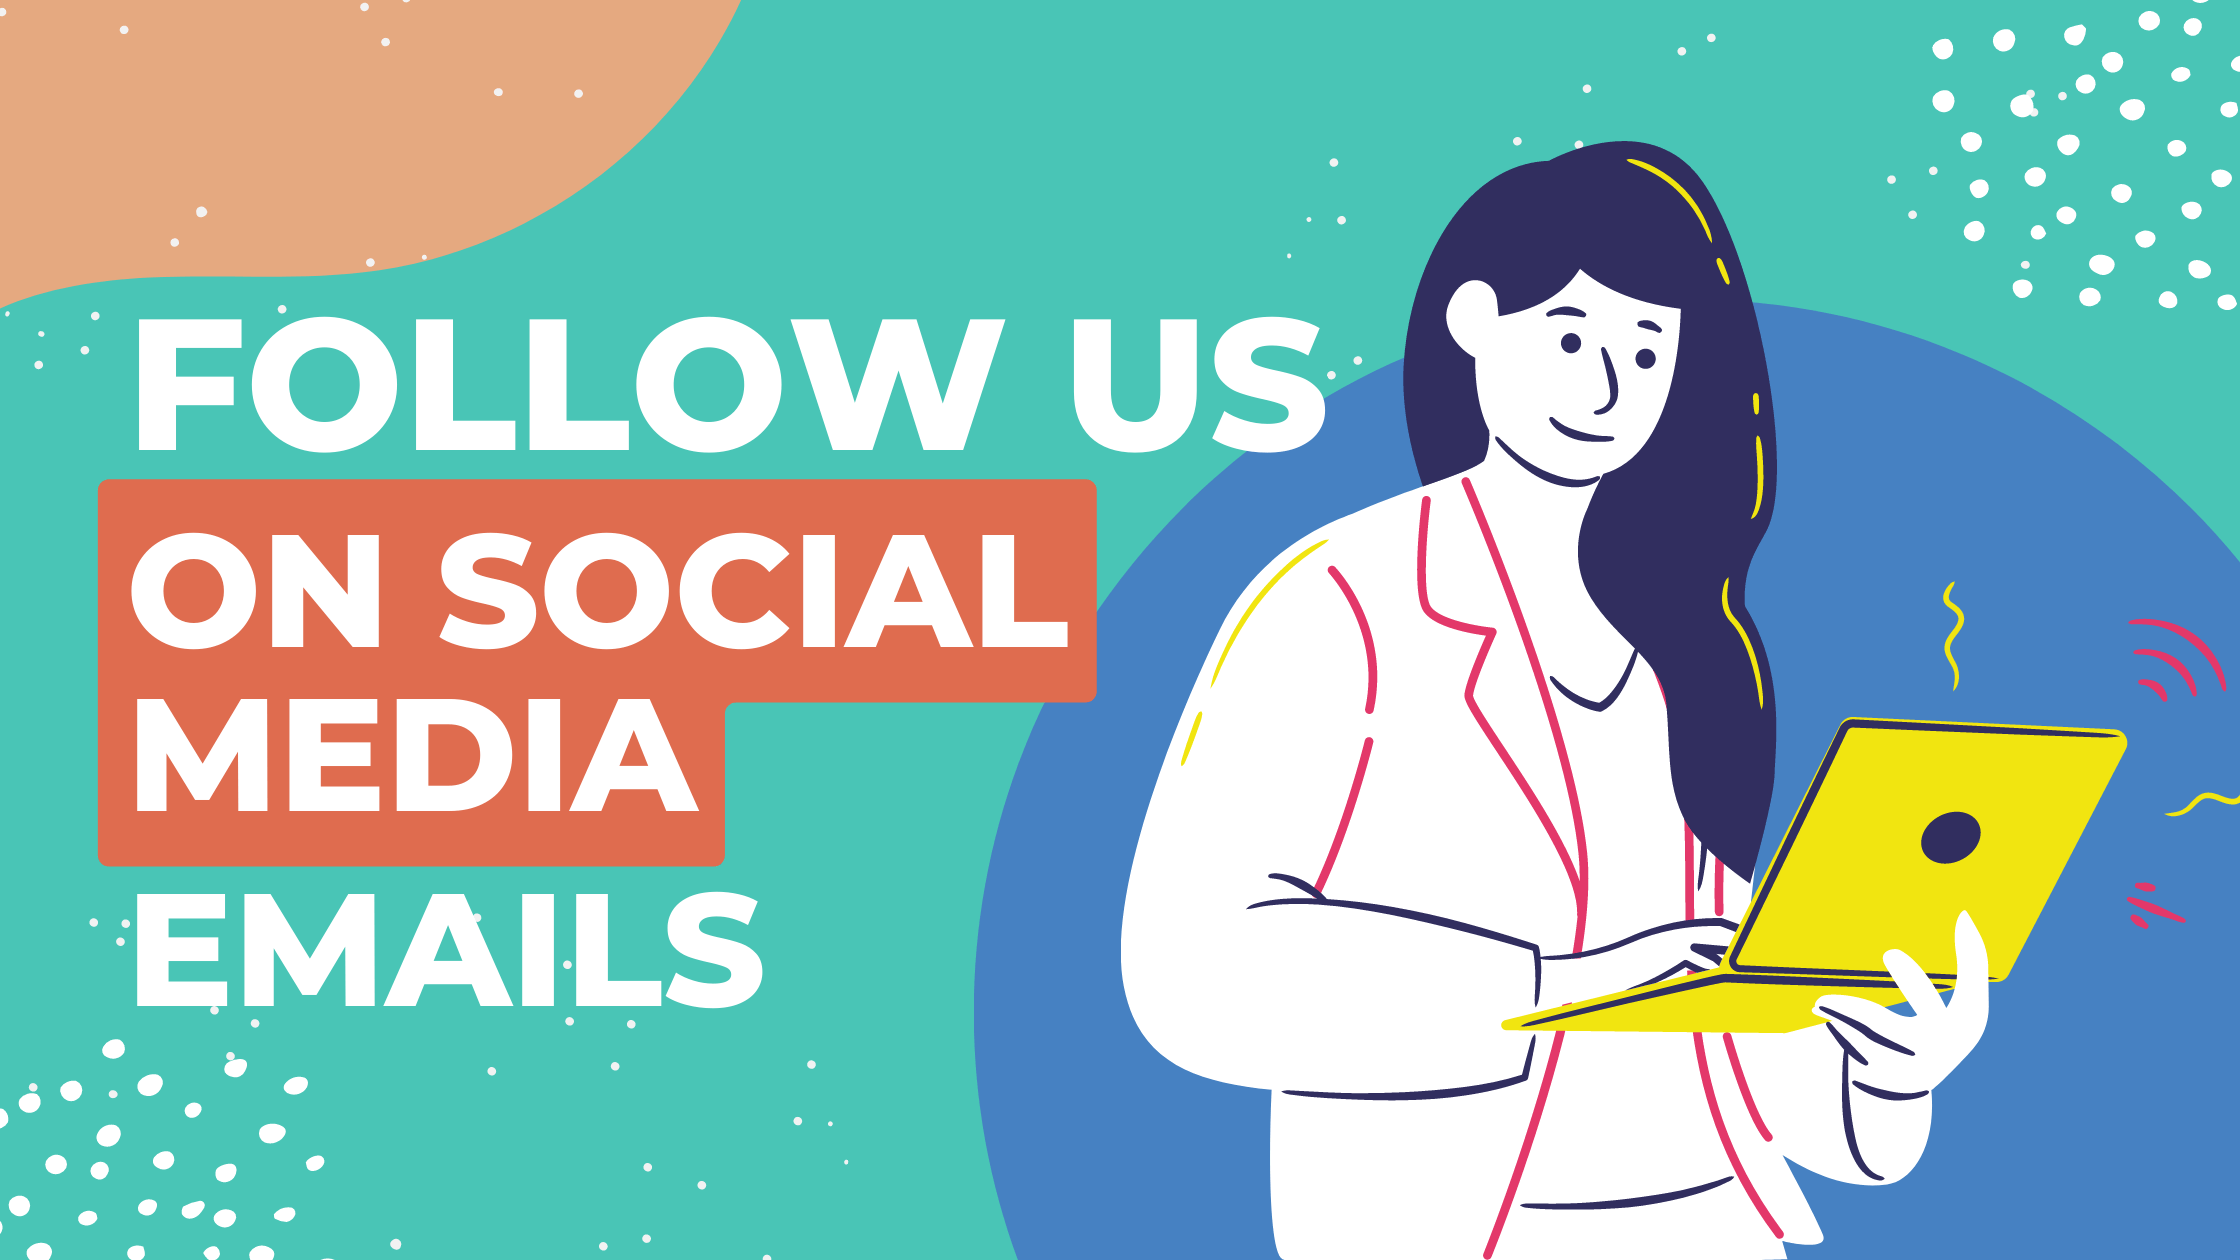 5 Examples of Follow Us on Social Media Emails That Actually Work